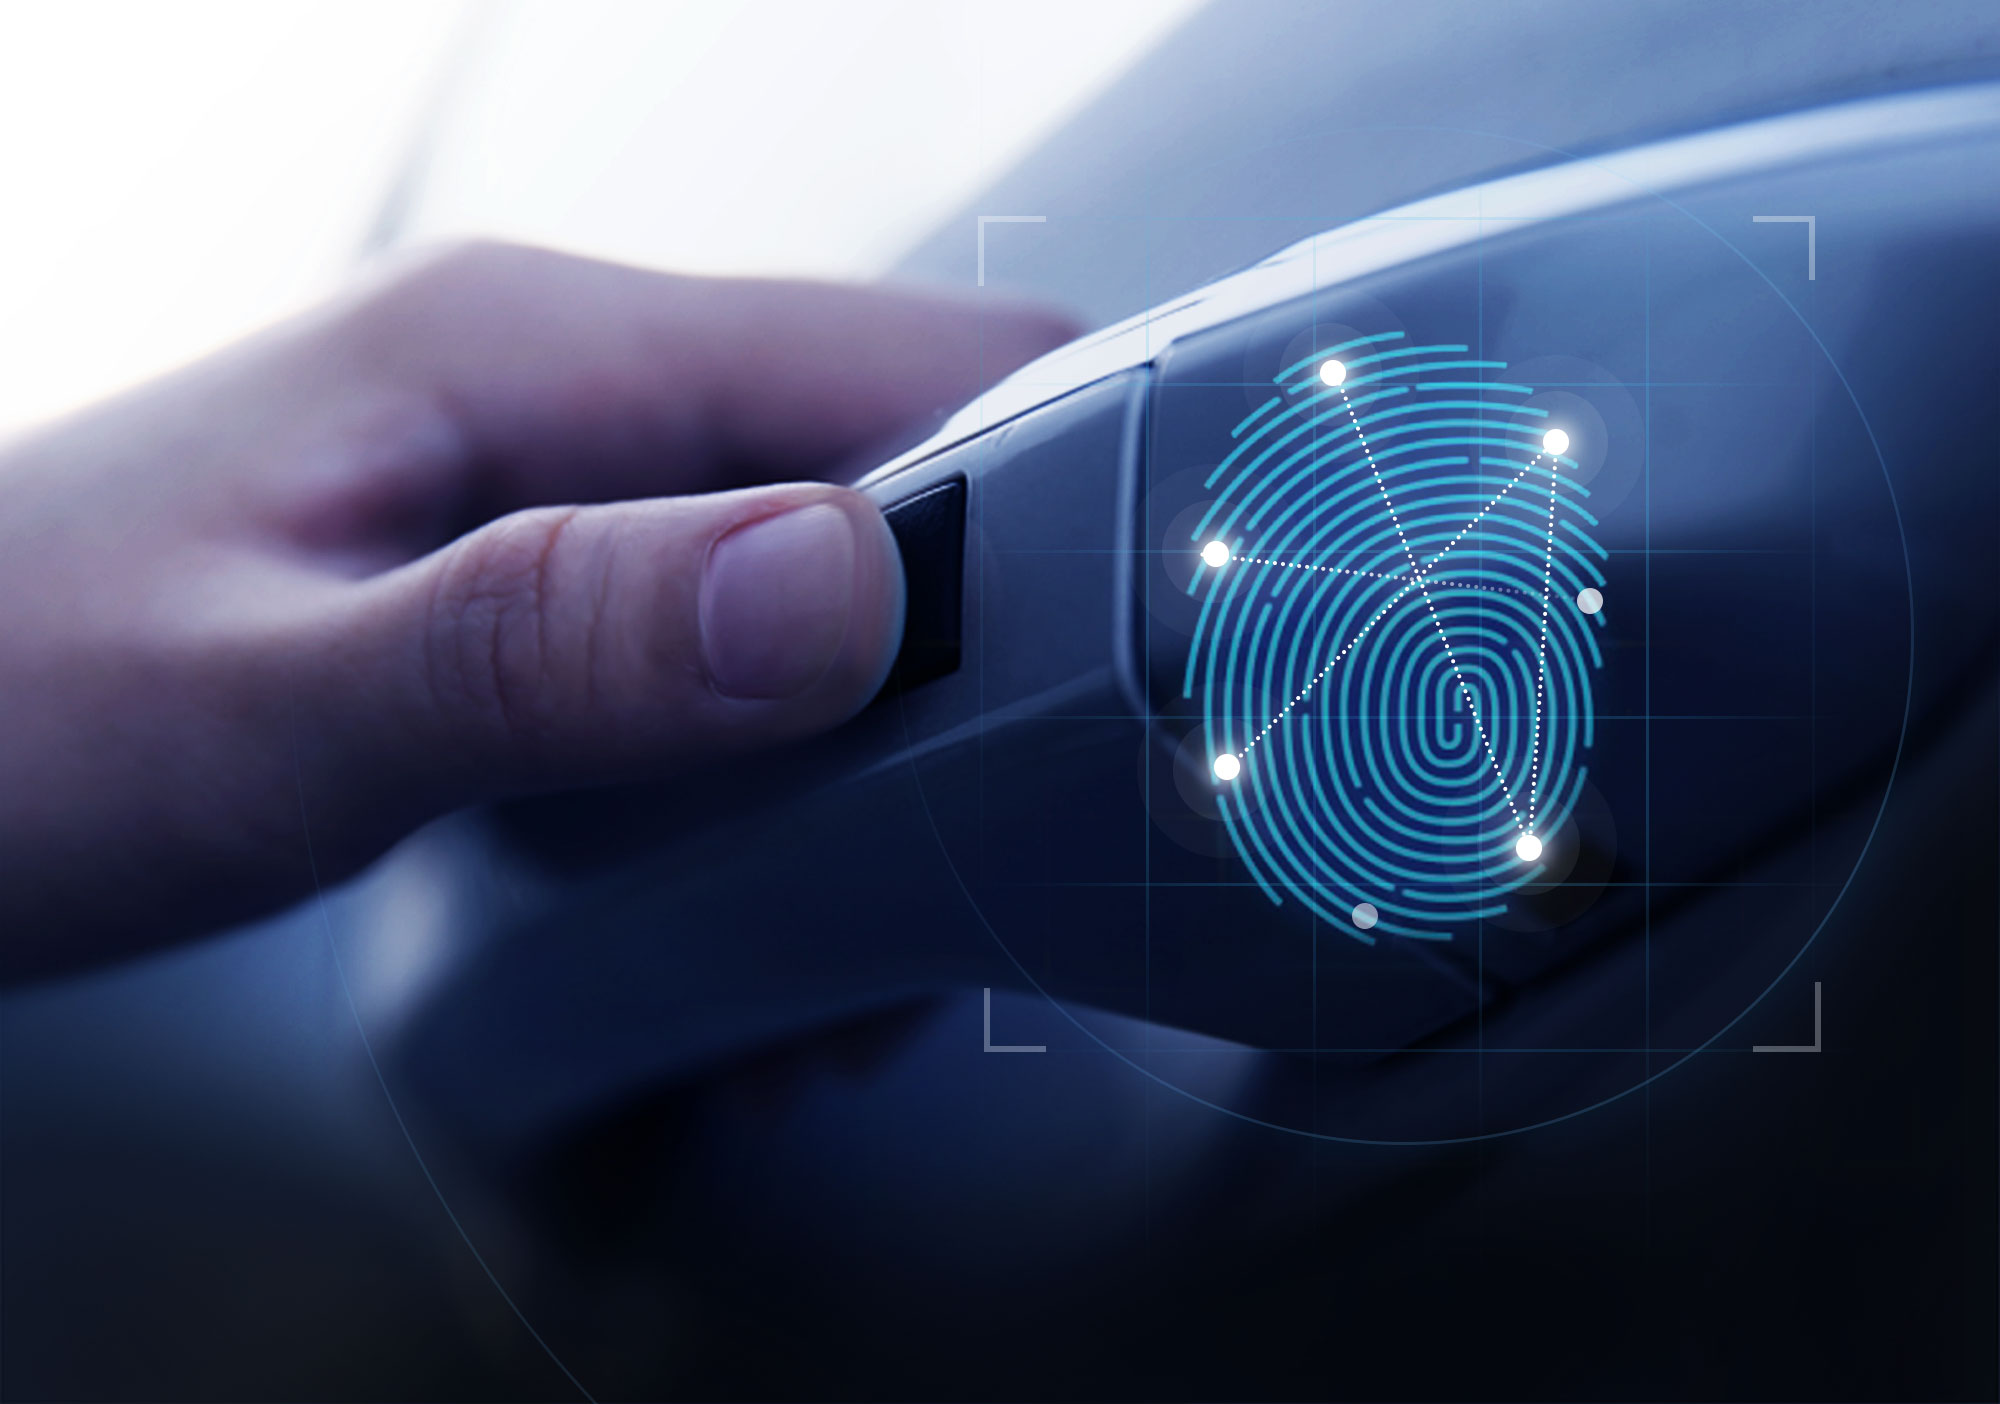 The number of minutiae matched in fingerprint patterns with stored templates determines the level of security as well as ease of use